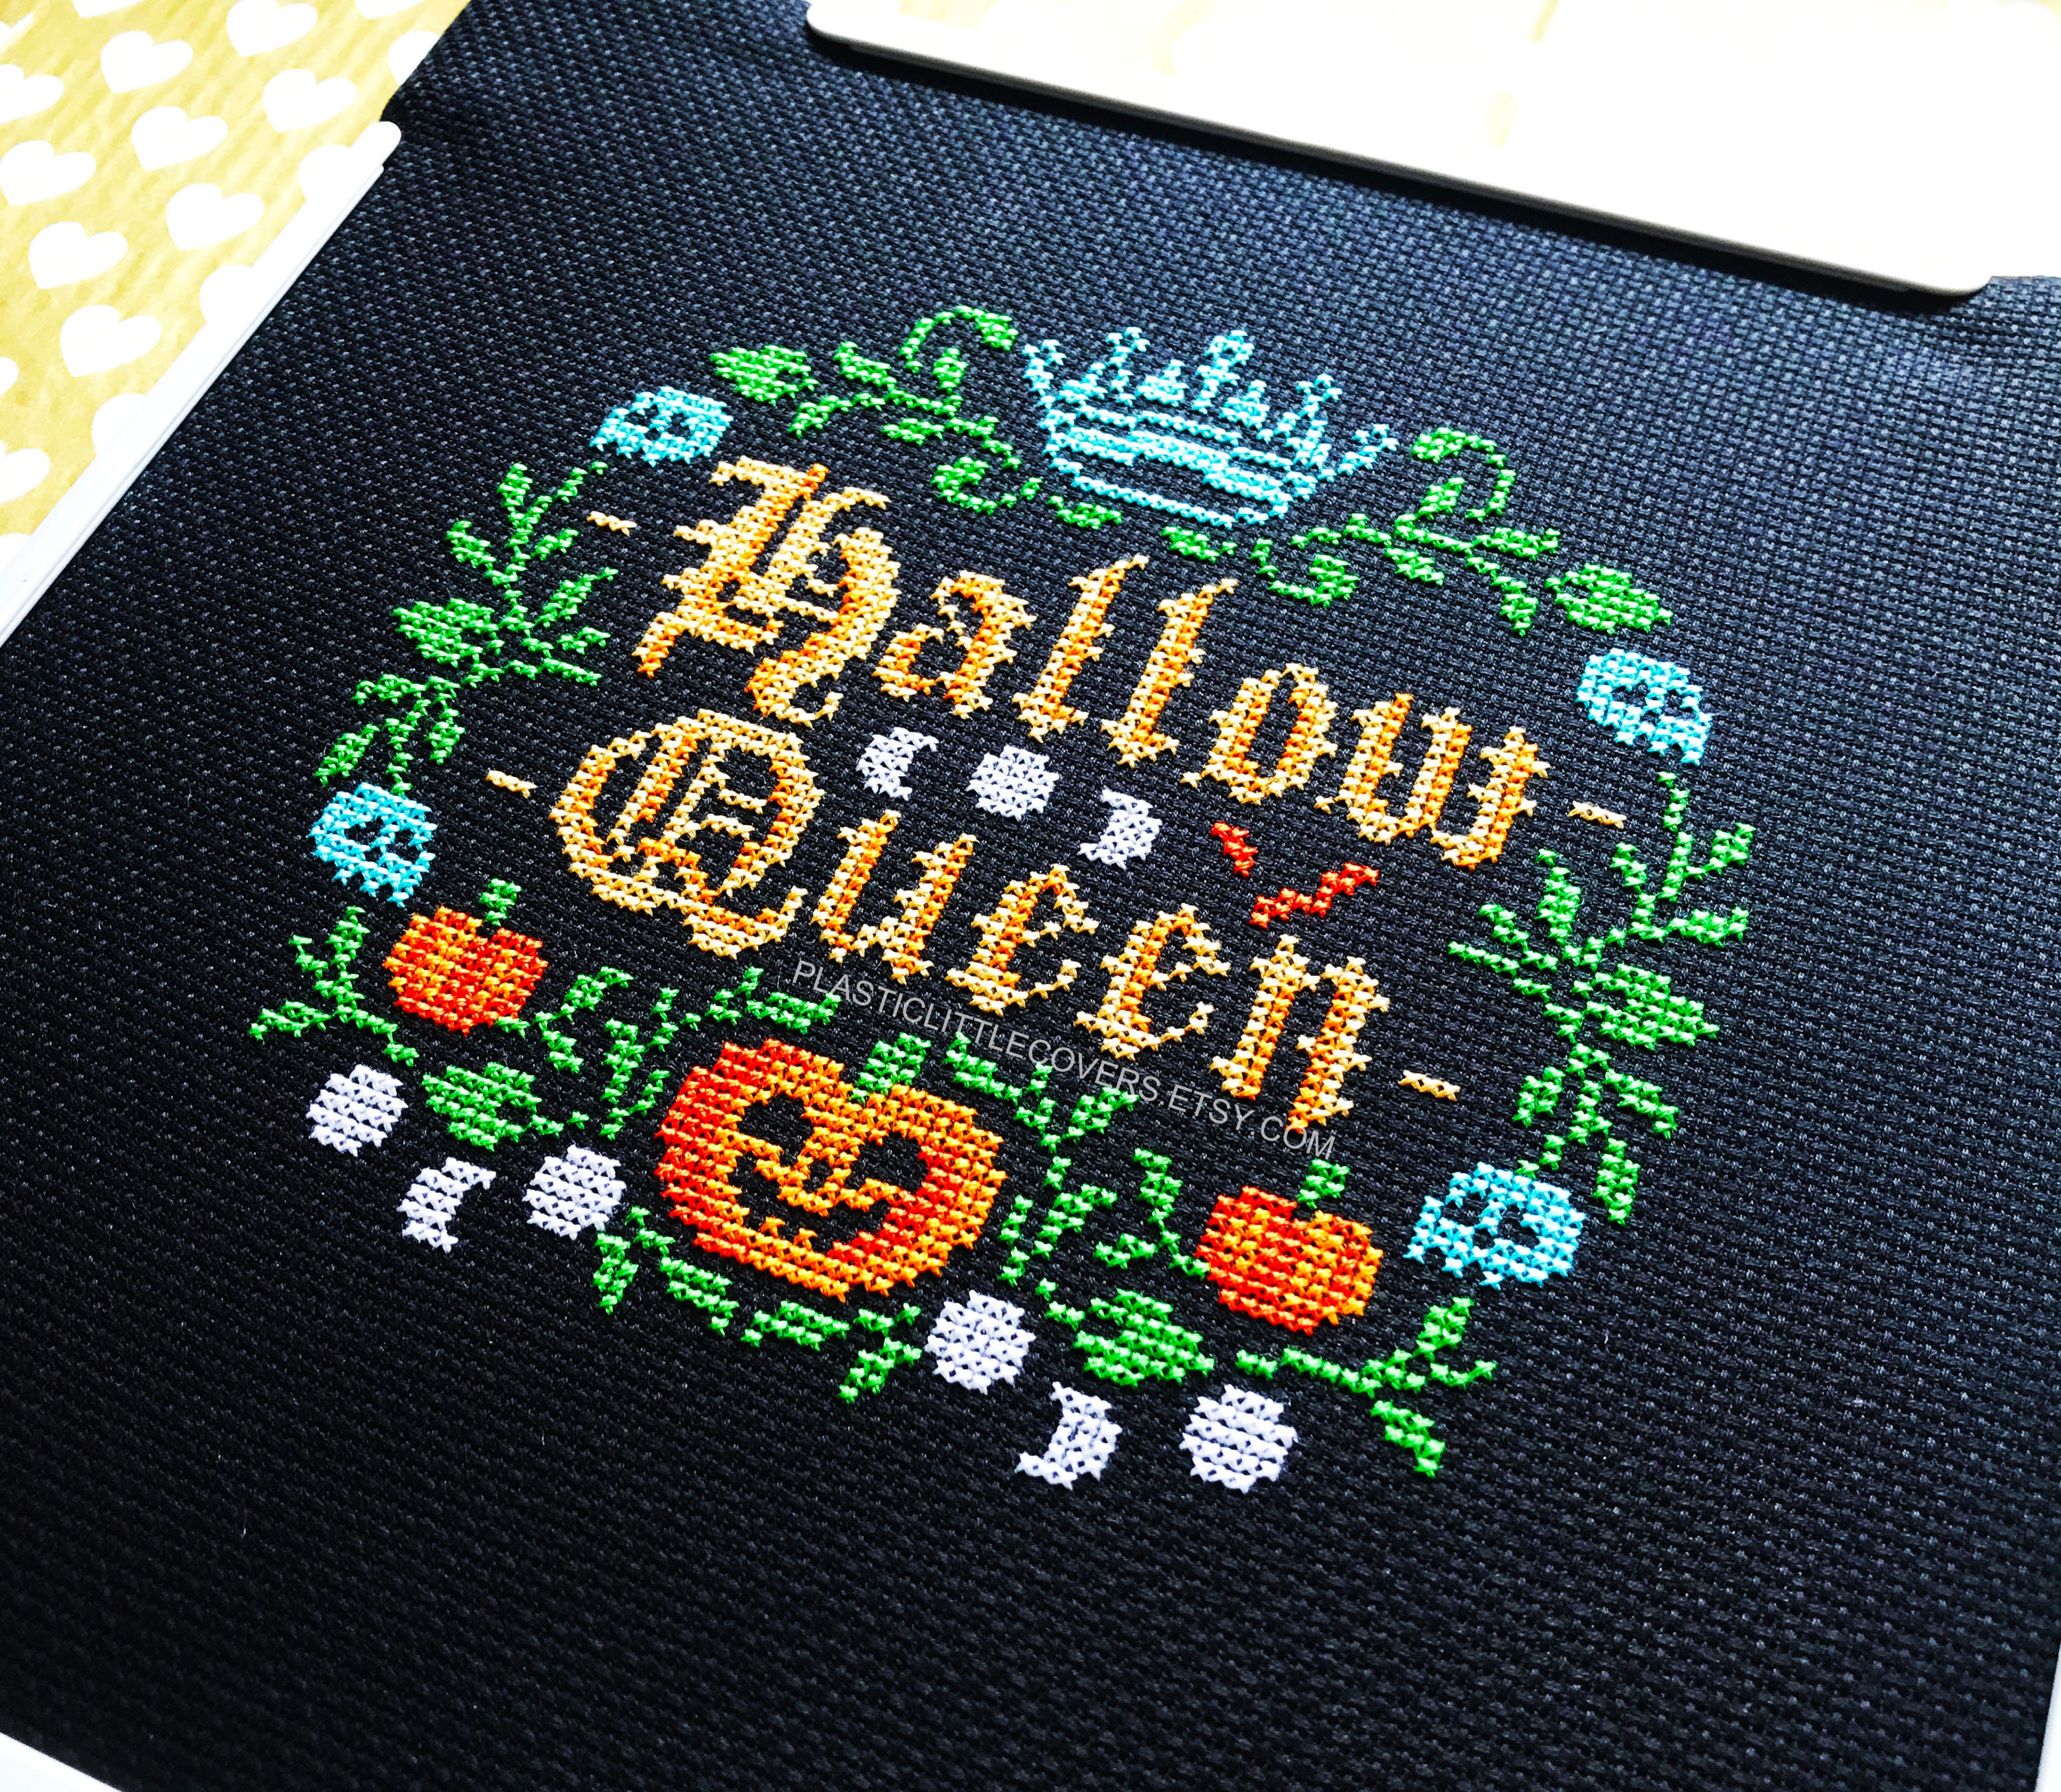 Halloween Themed Embroidery Kit with Patterns and Instructions Cross Stitch Kits for Adults Beginners, Adult Unisex